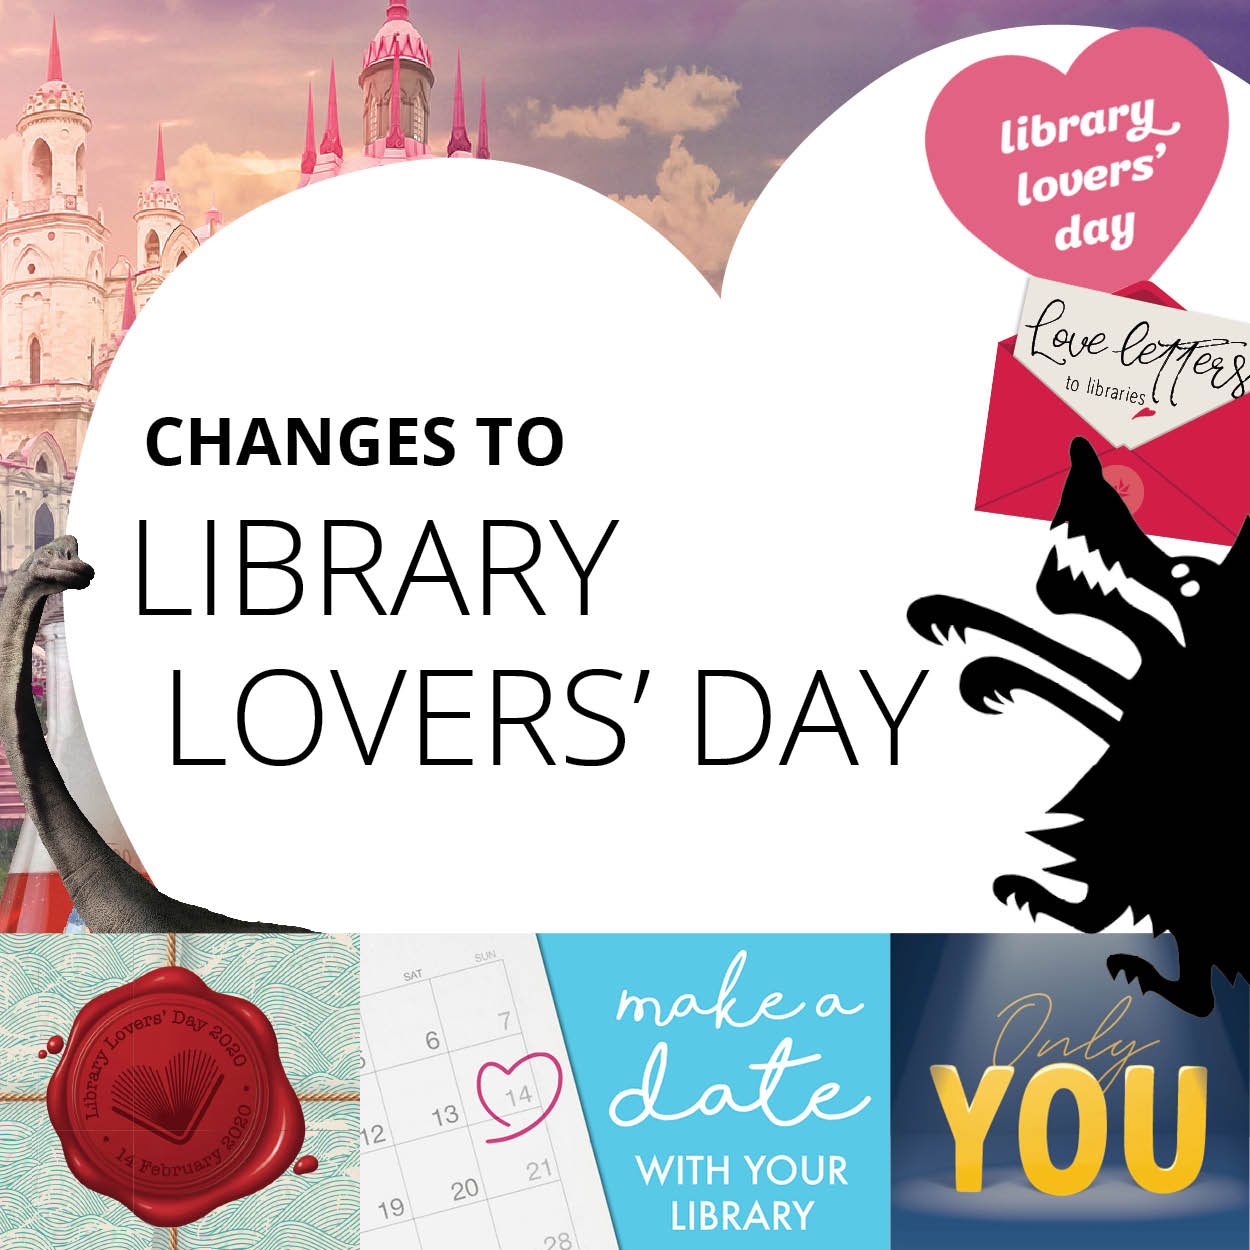 Reimagining Library Lovers' Day